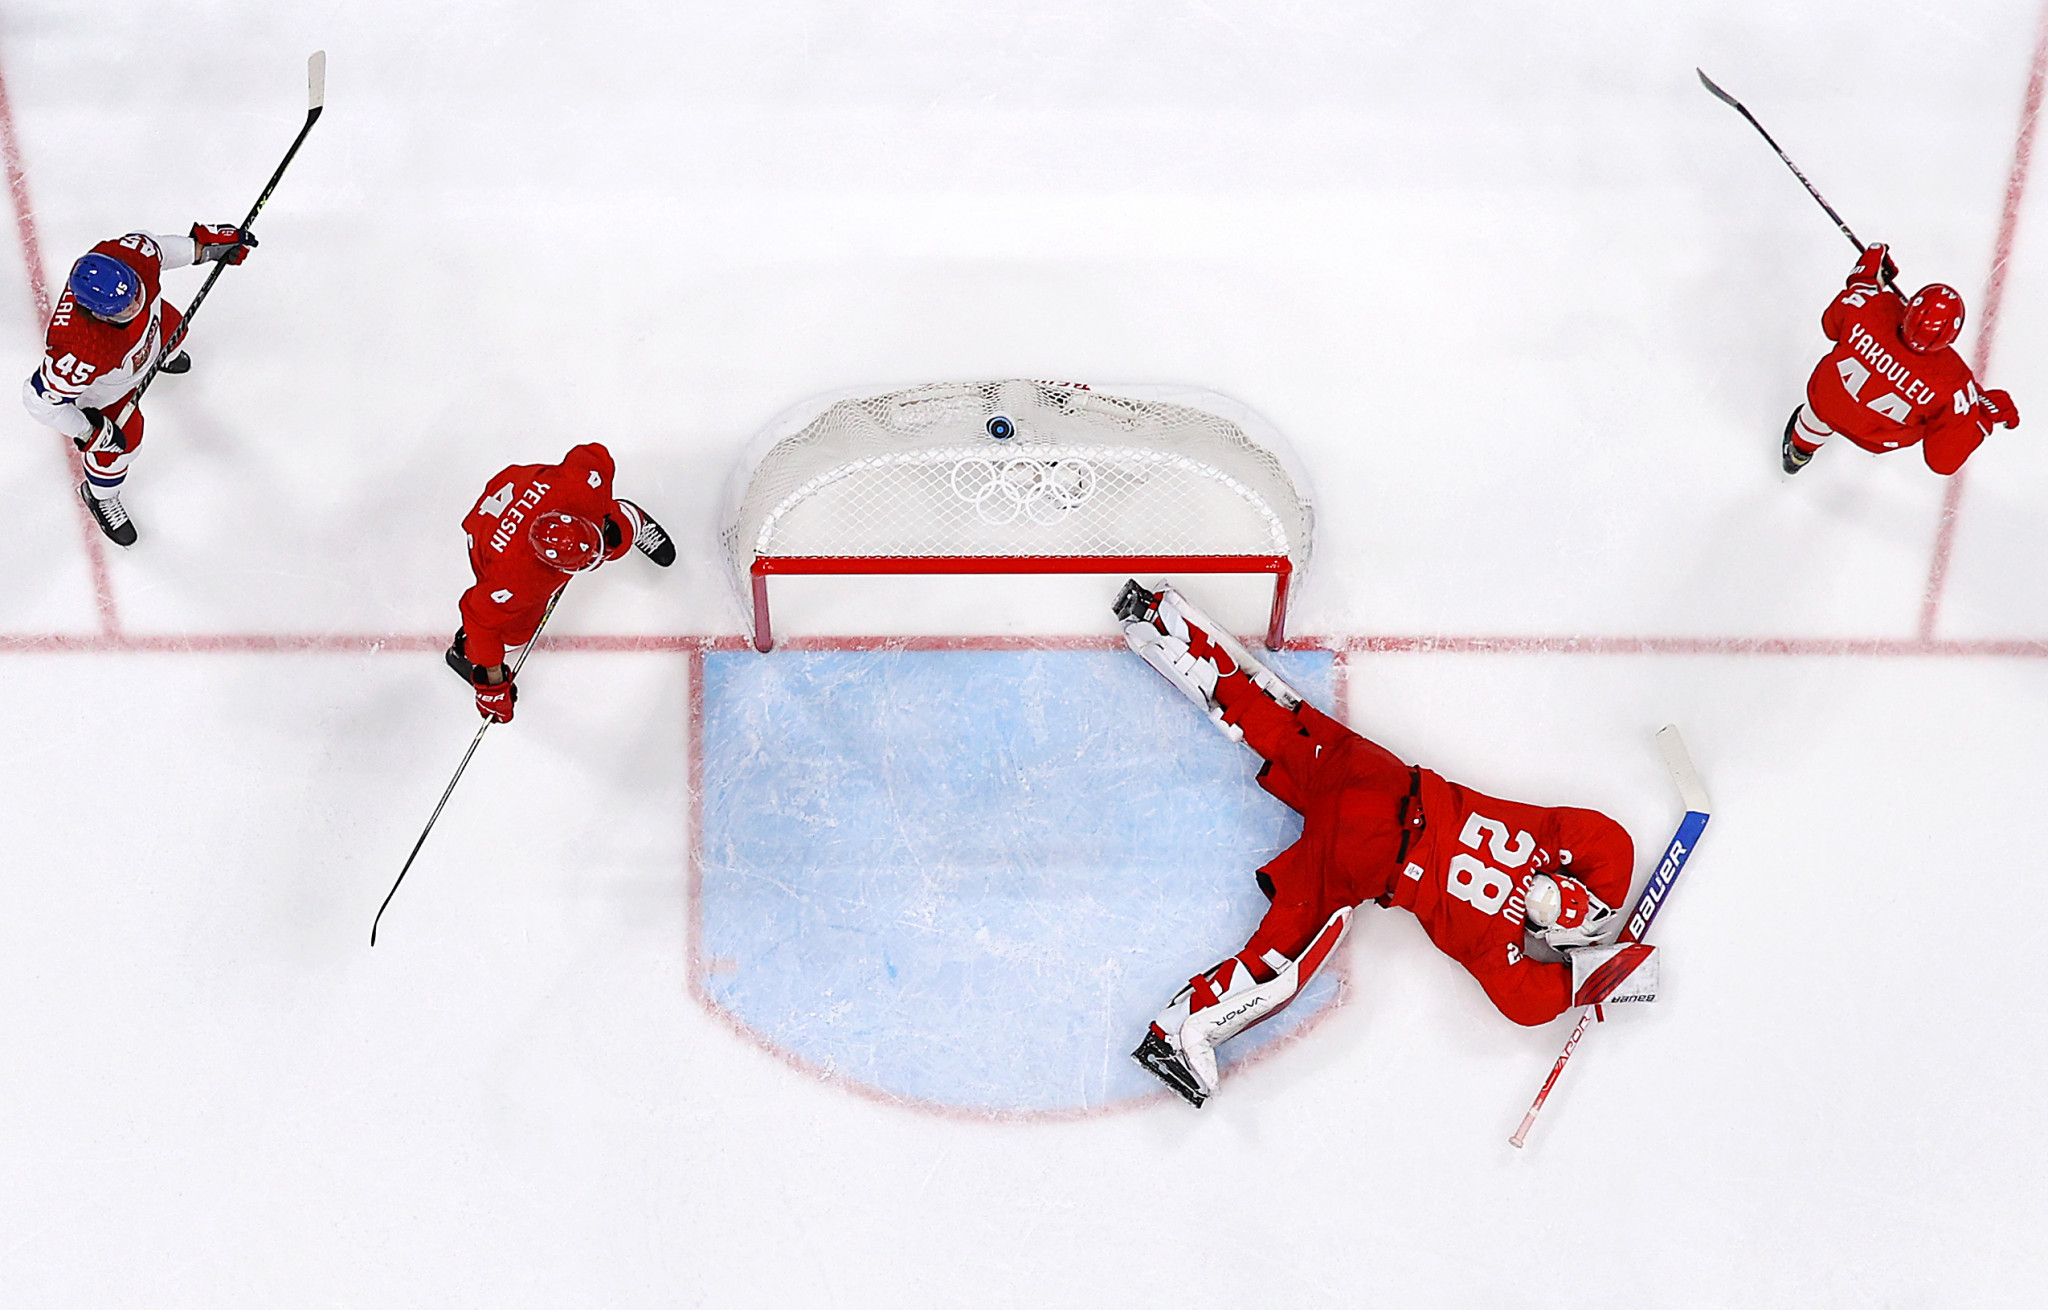 Action from the Group B men's ice hockey match between the Russian Olympic Committee and Czech Republic ©Getty Images